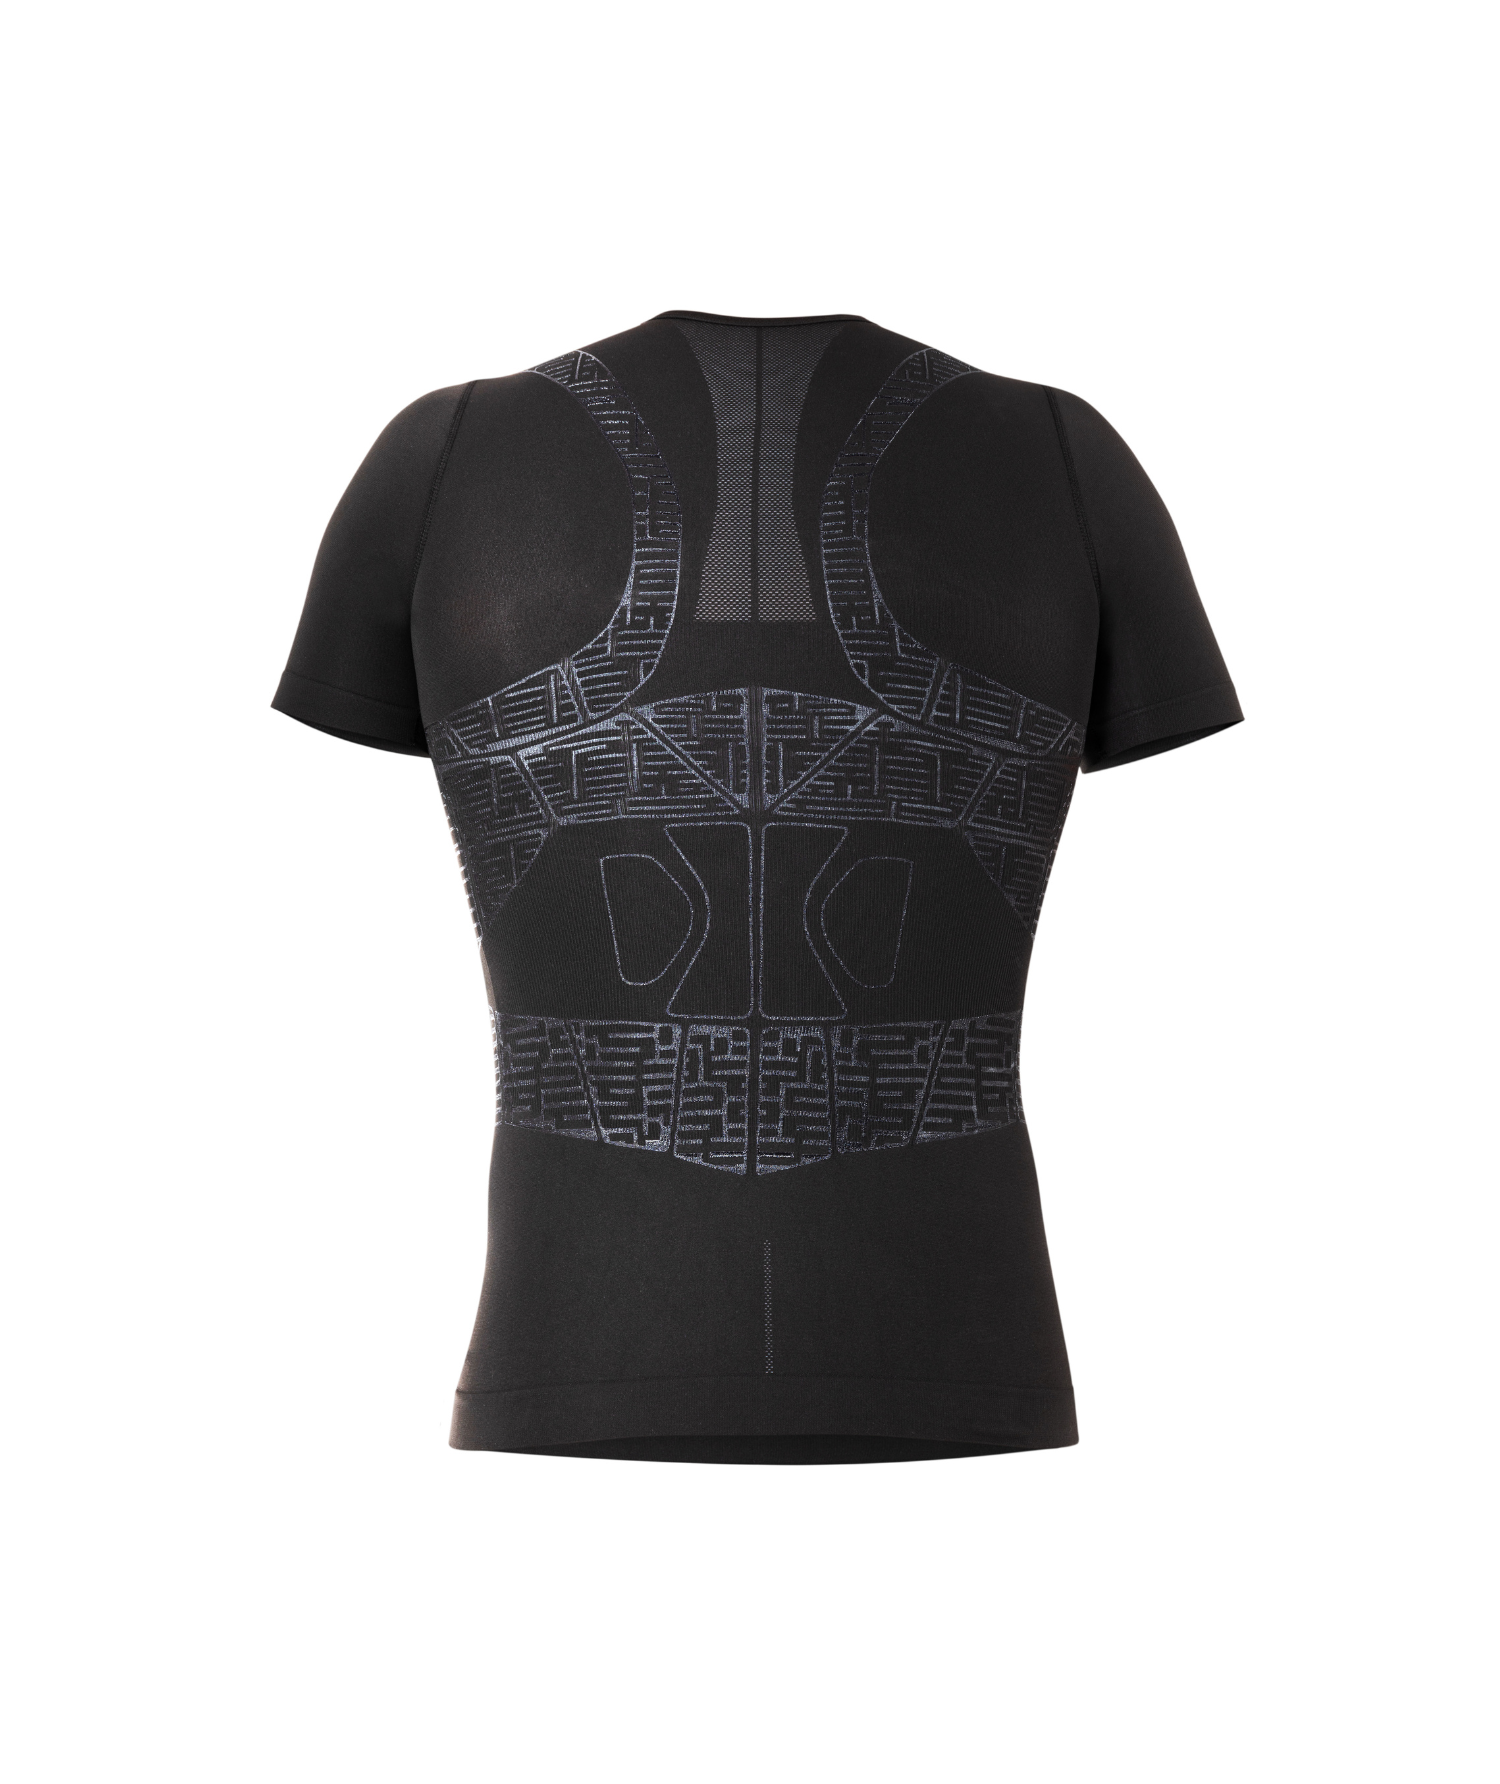 Improved Posture Performance Compression Shirt - Short Sleeve for Men and  Women